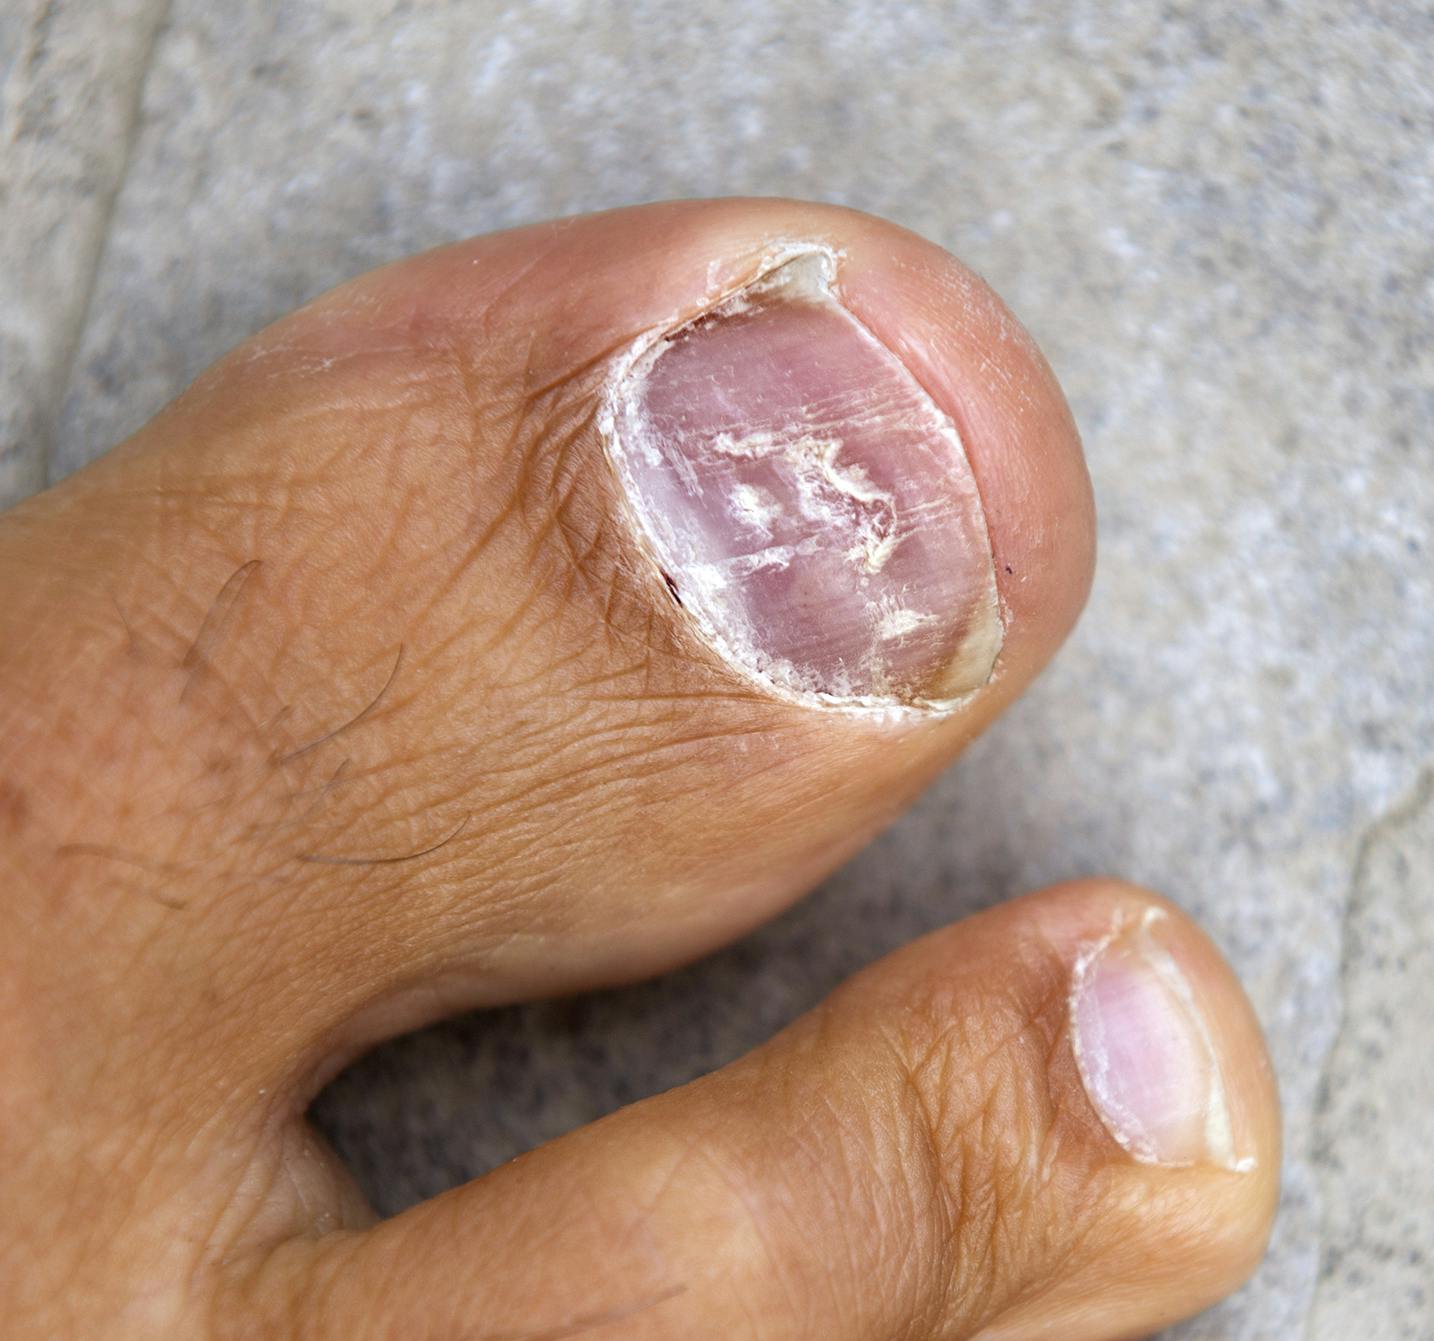 PDF) Fungal nail infections